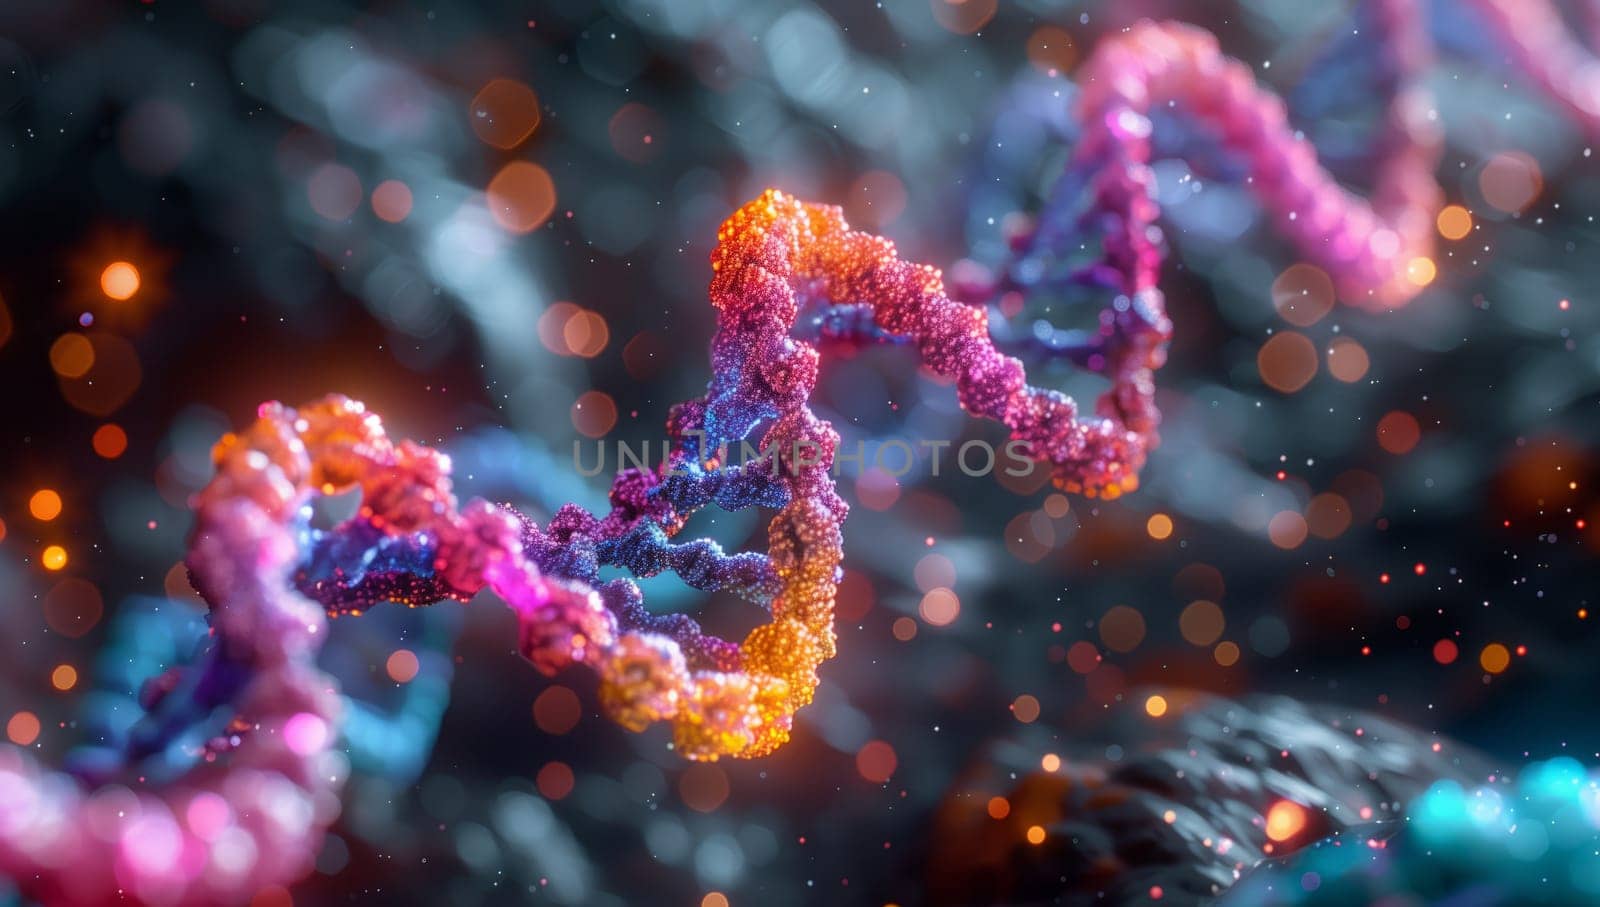 a computer generated image of a colorful dna strand by richwolf